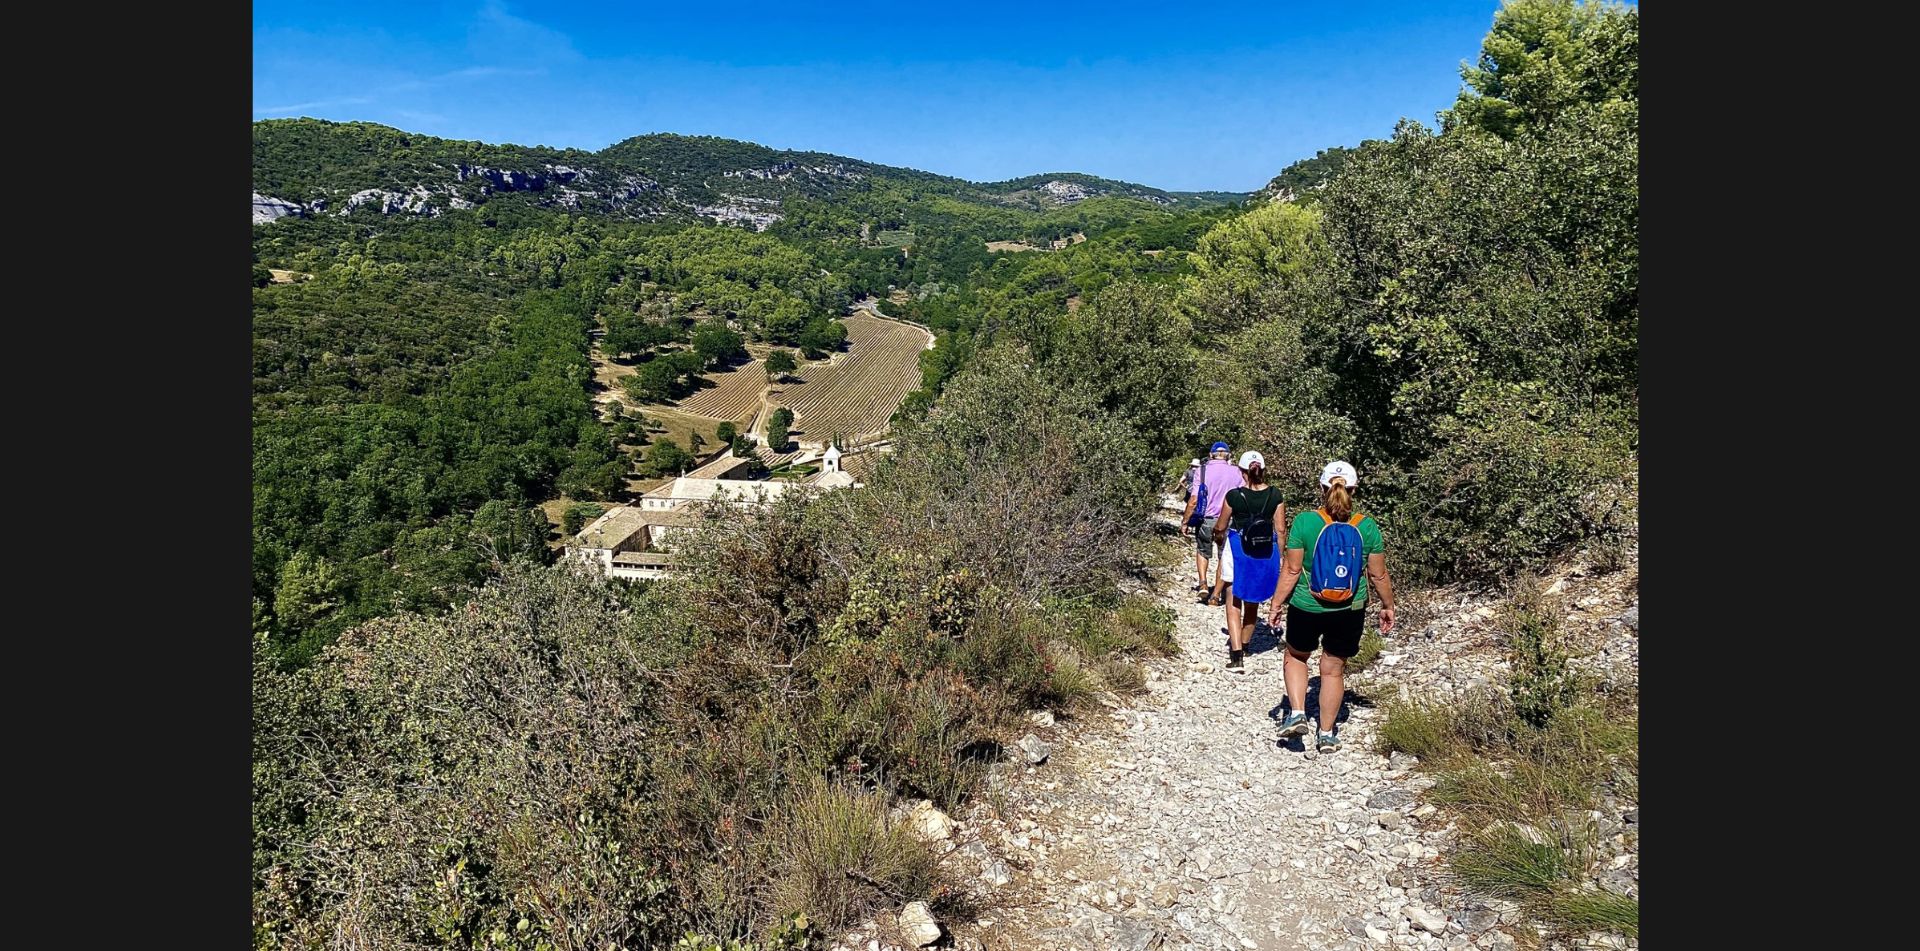 5 - Soak in the scenic views on your way to Sénanque Abbey,